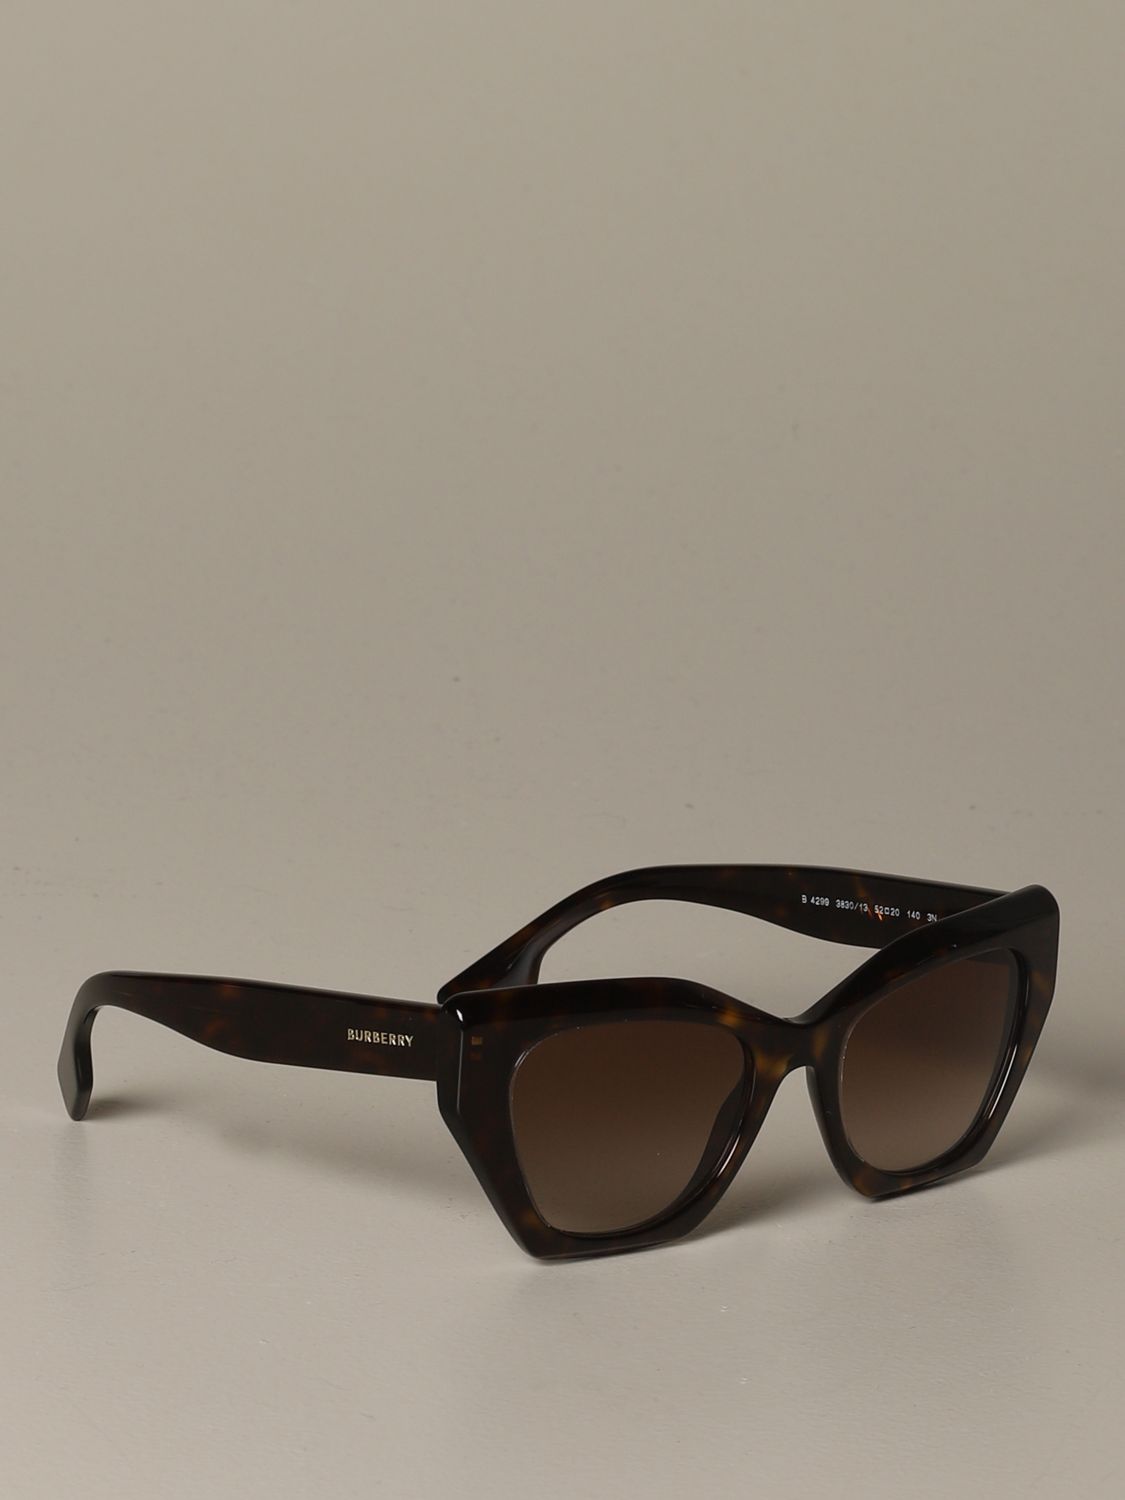 Burberry sunglasses with check details 